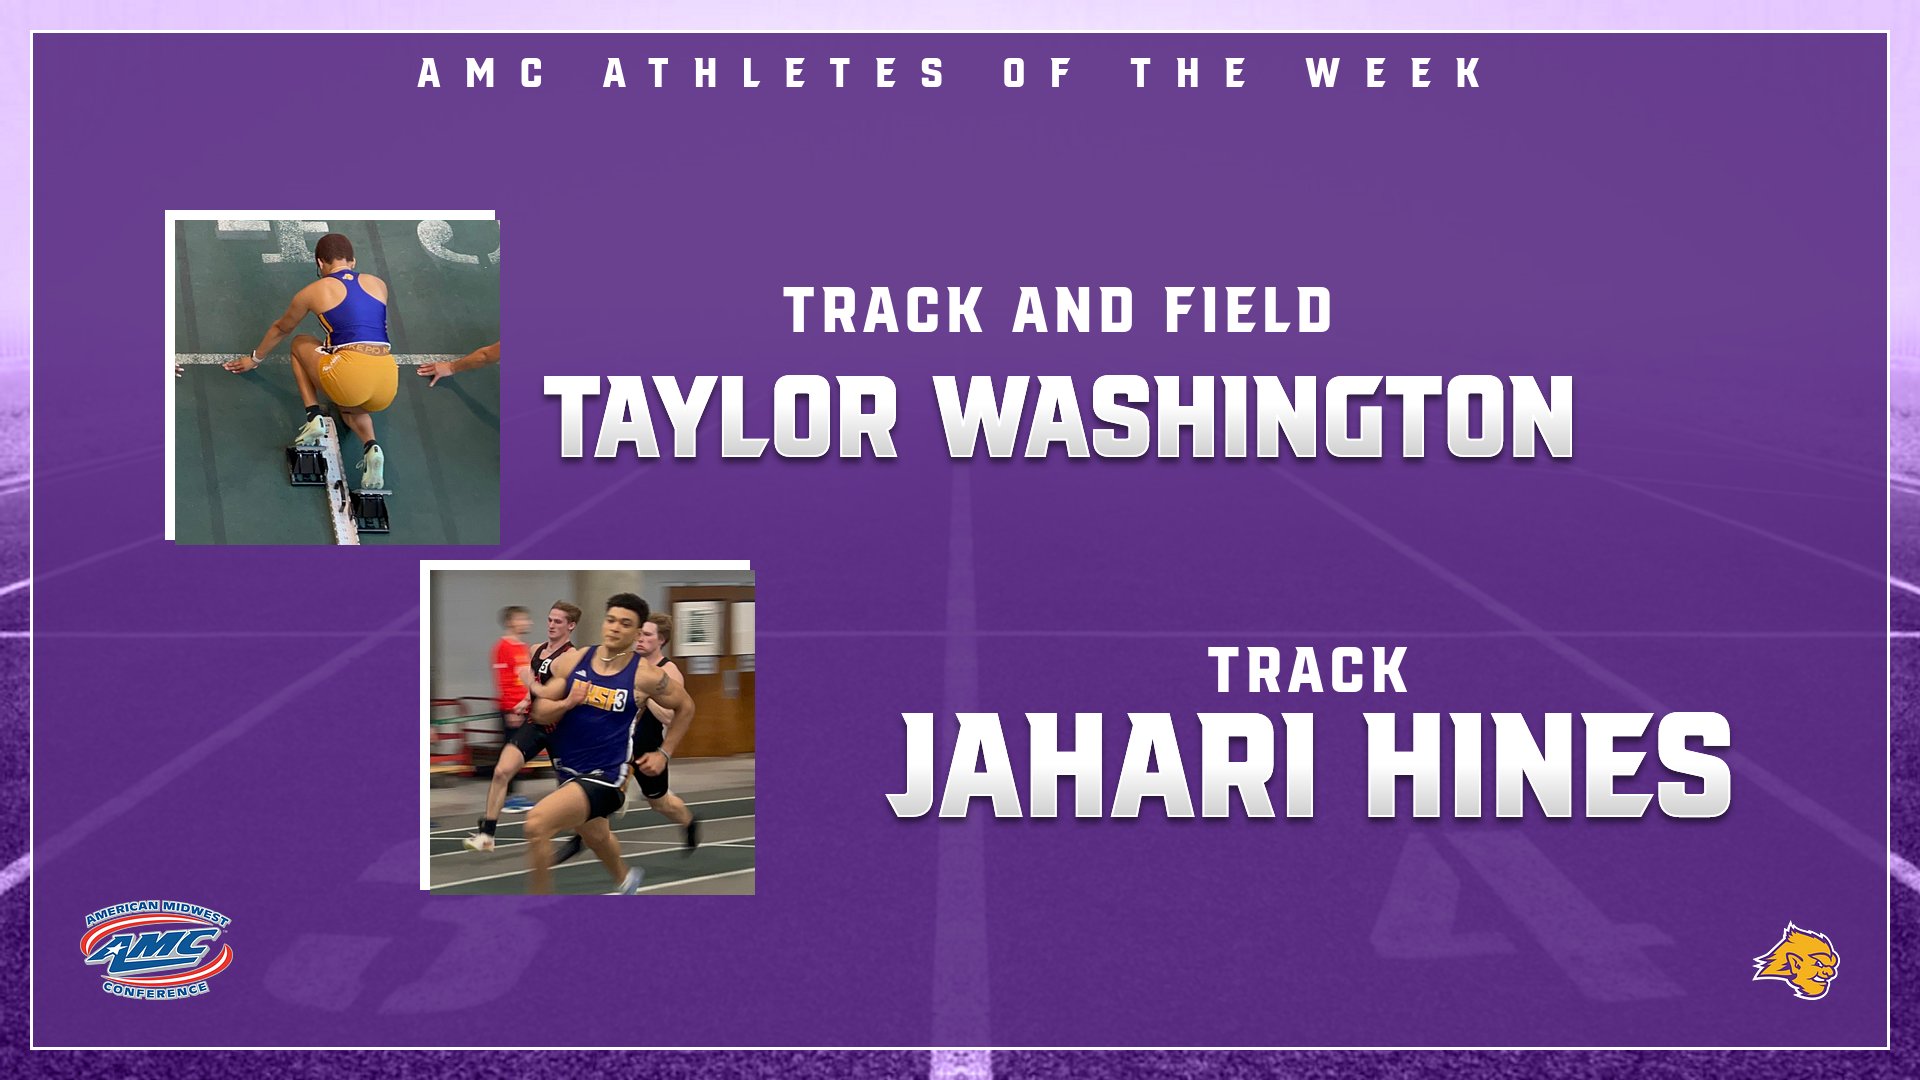 Washington and Hines team up again for AMC Athlete of the Week awards